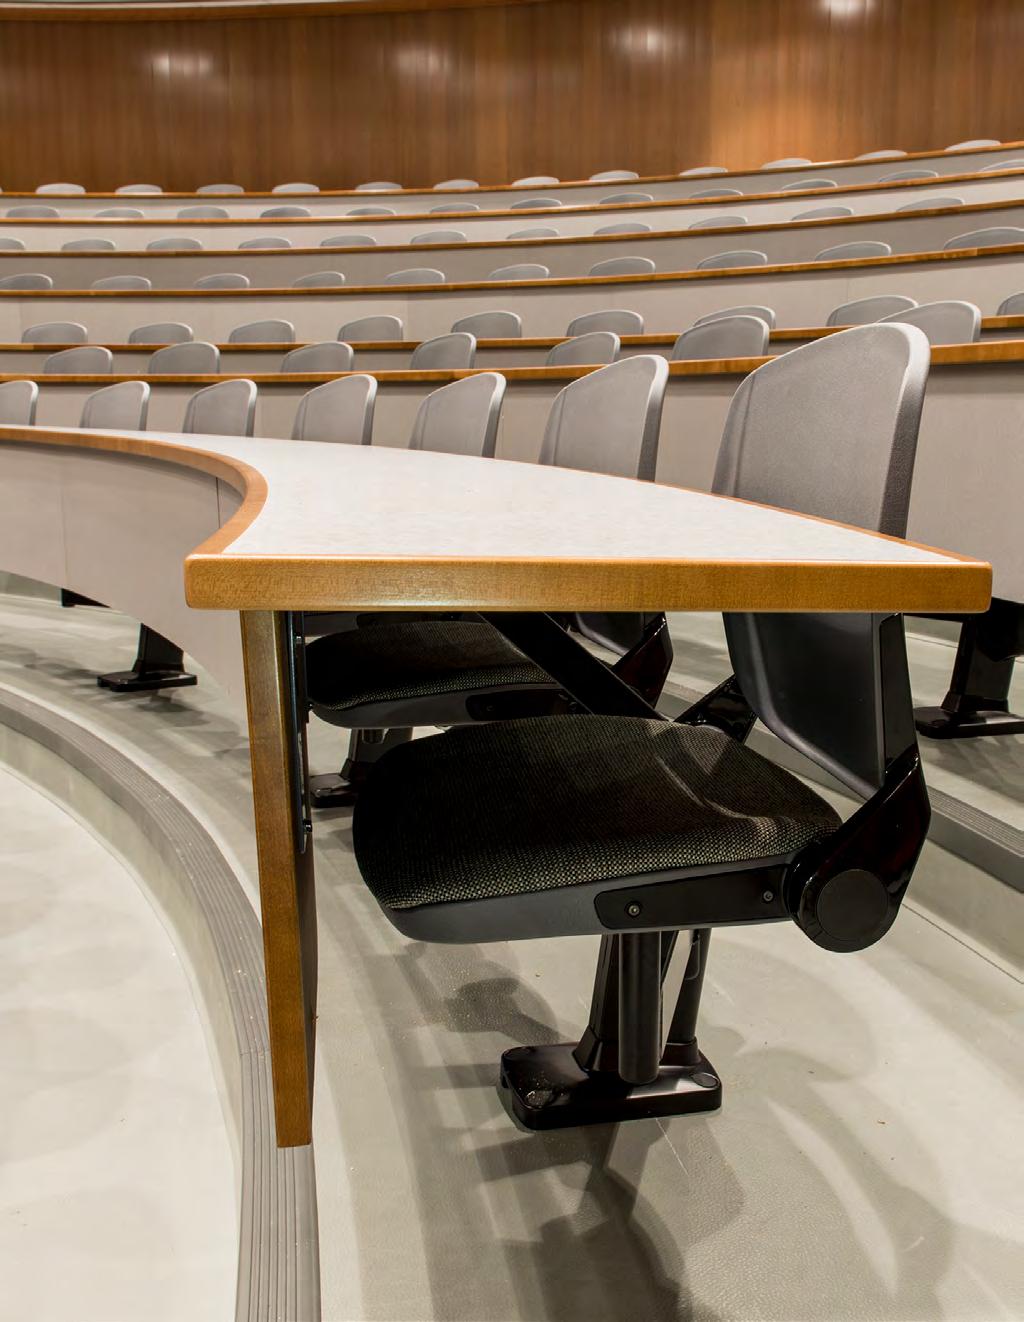 The Irwin Difference For over 100 years, Irwin Seating Company s focus has been on meeting our customers need for comfortable, stylish and reliable auditorium / theater seating.